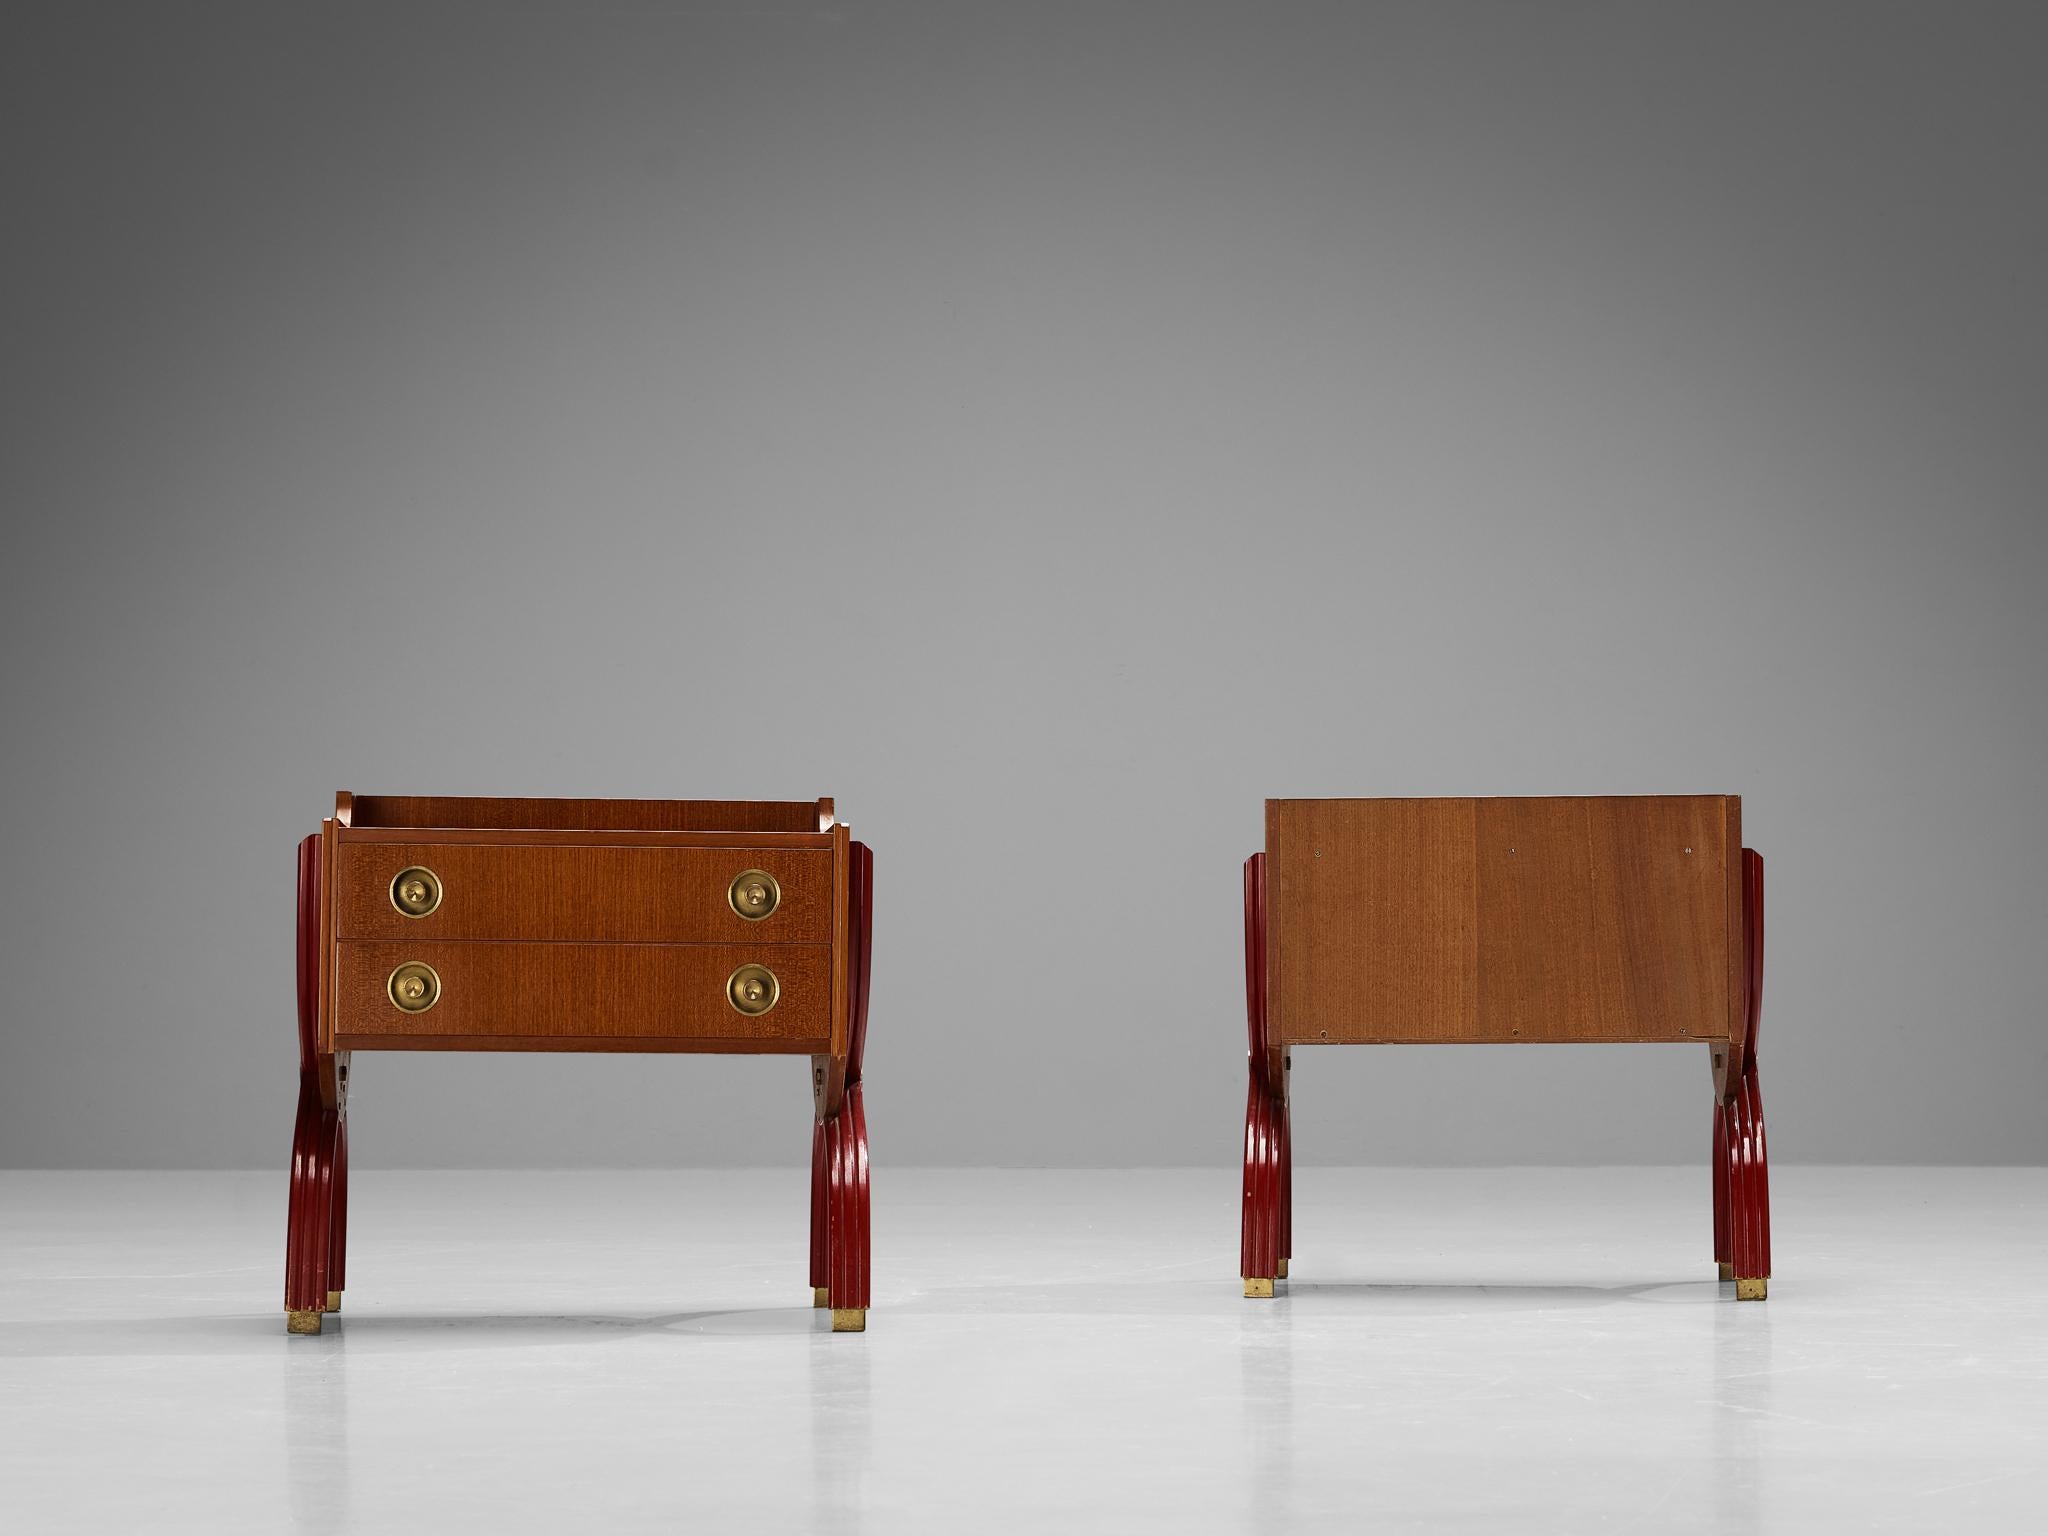  Tosi Arredamenti Pair of Cabinets or Night Stands in Mahogany and Brass  For Sale 1